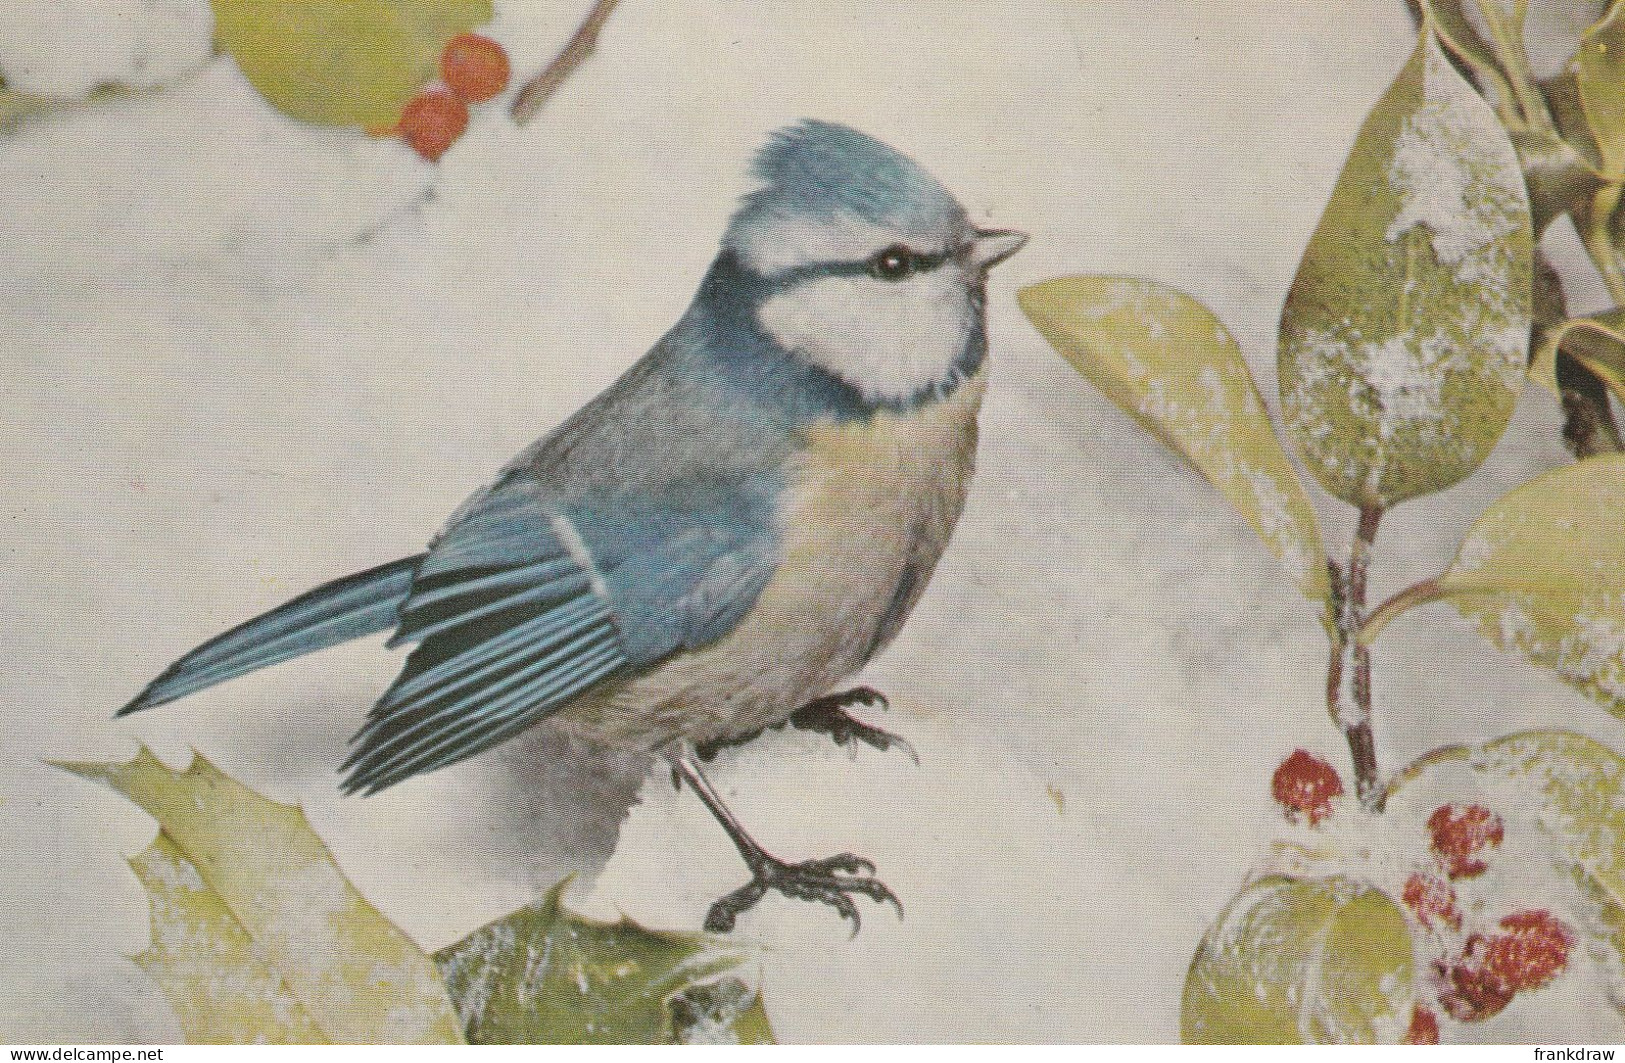 Postcard - Blue Tit Also Known As The Tom Tit - Card No.6185674  - Very Good - Unclassified